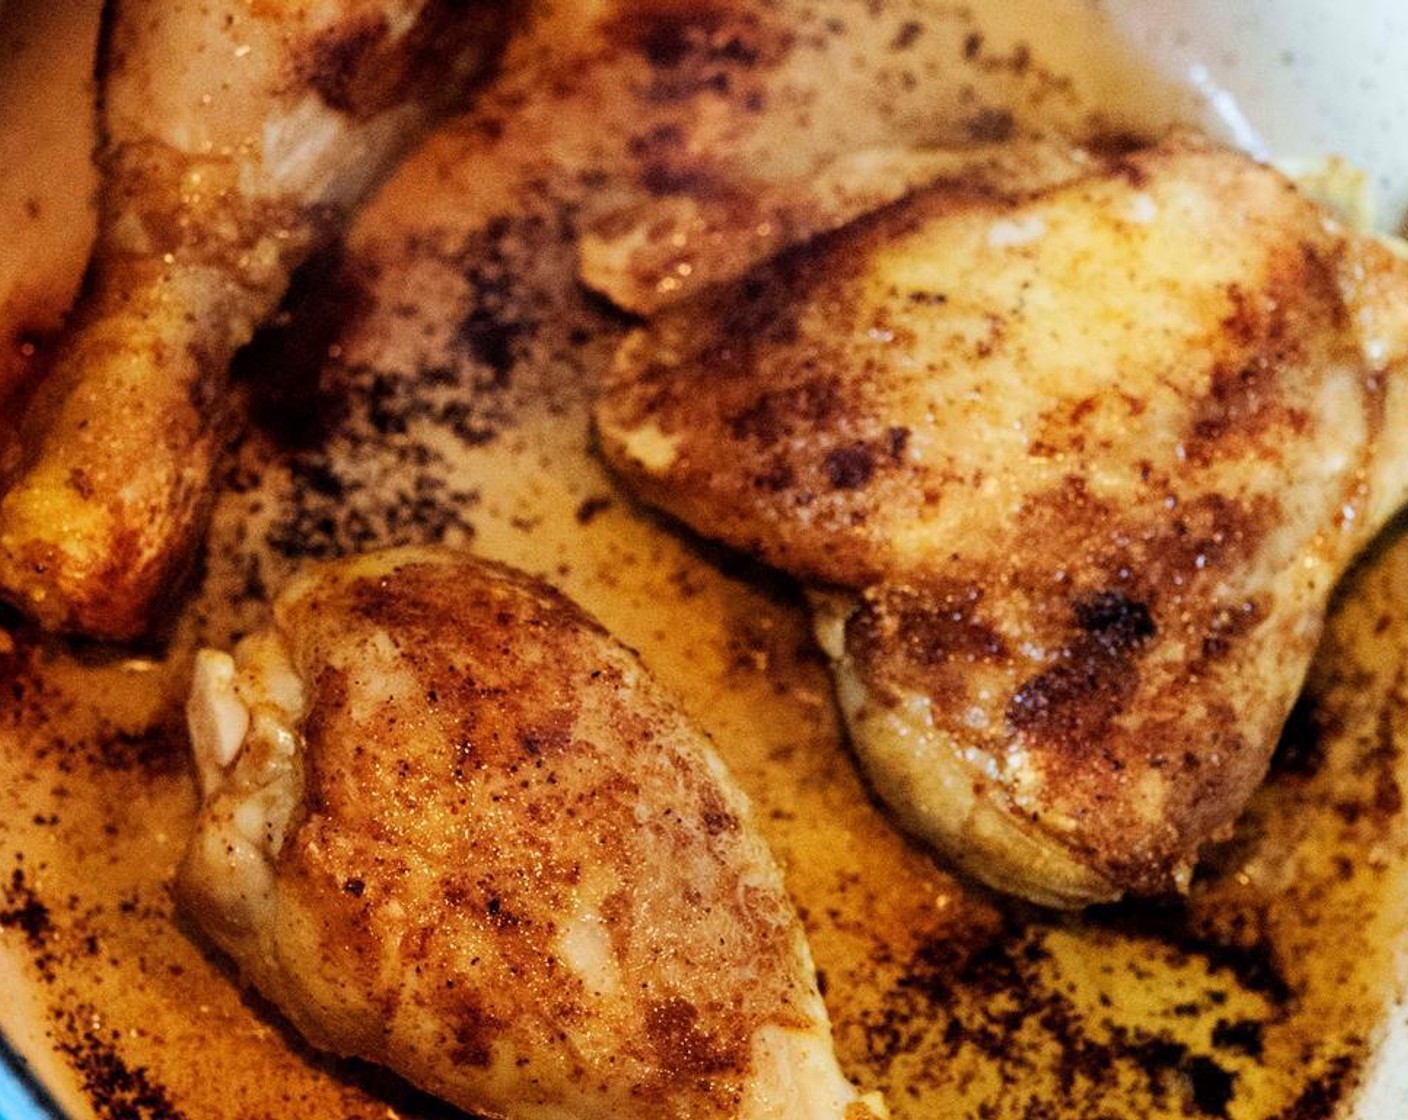 step 4 In a large Dutch oven or other heavy pot, heat Vegetable Oil (1 tsp) over high. In batches, cook chicken until browned on all sides, about 12 minutes total.